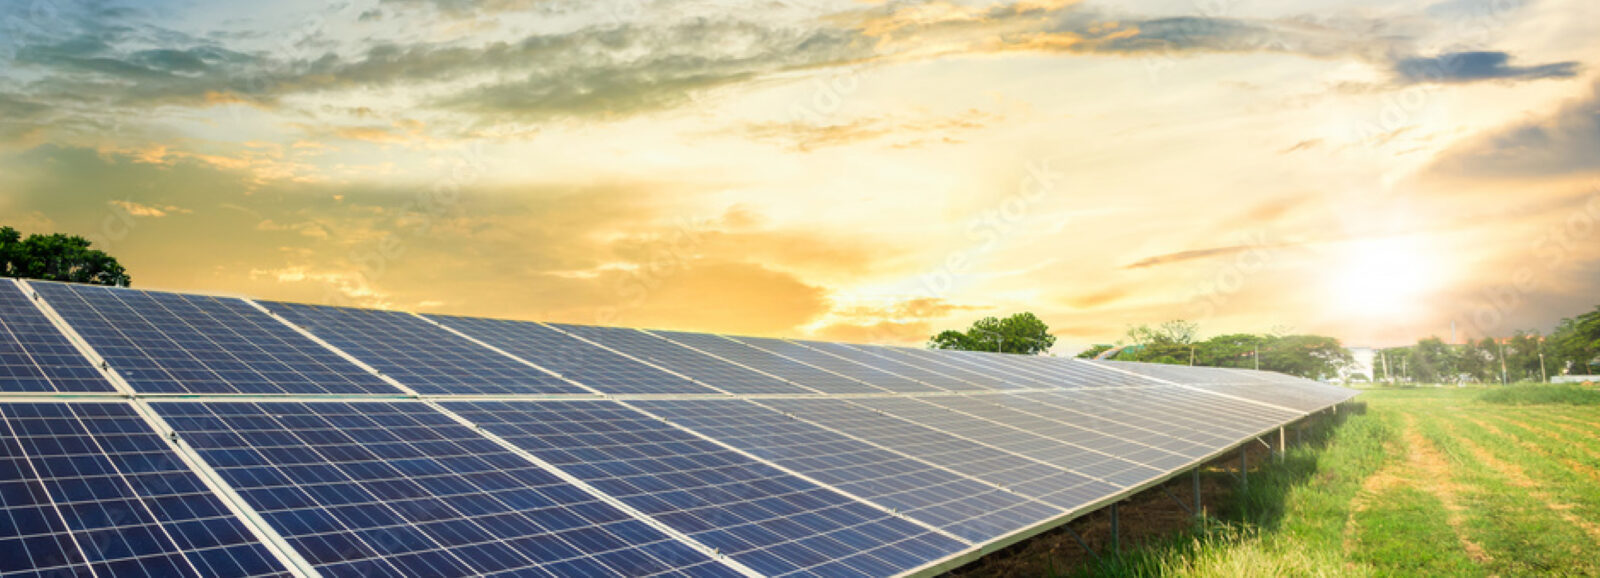 Solar pv panels- solar Pv solutions for businesses